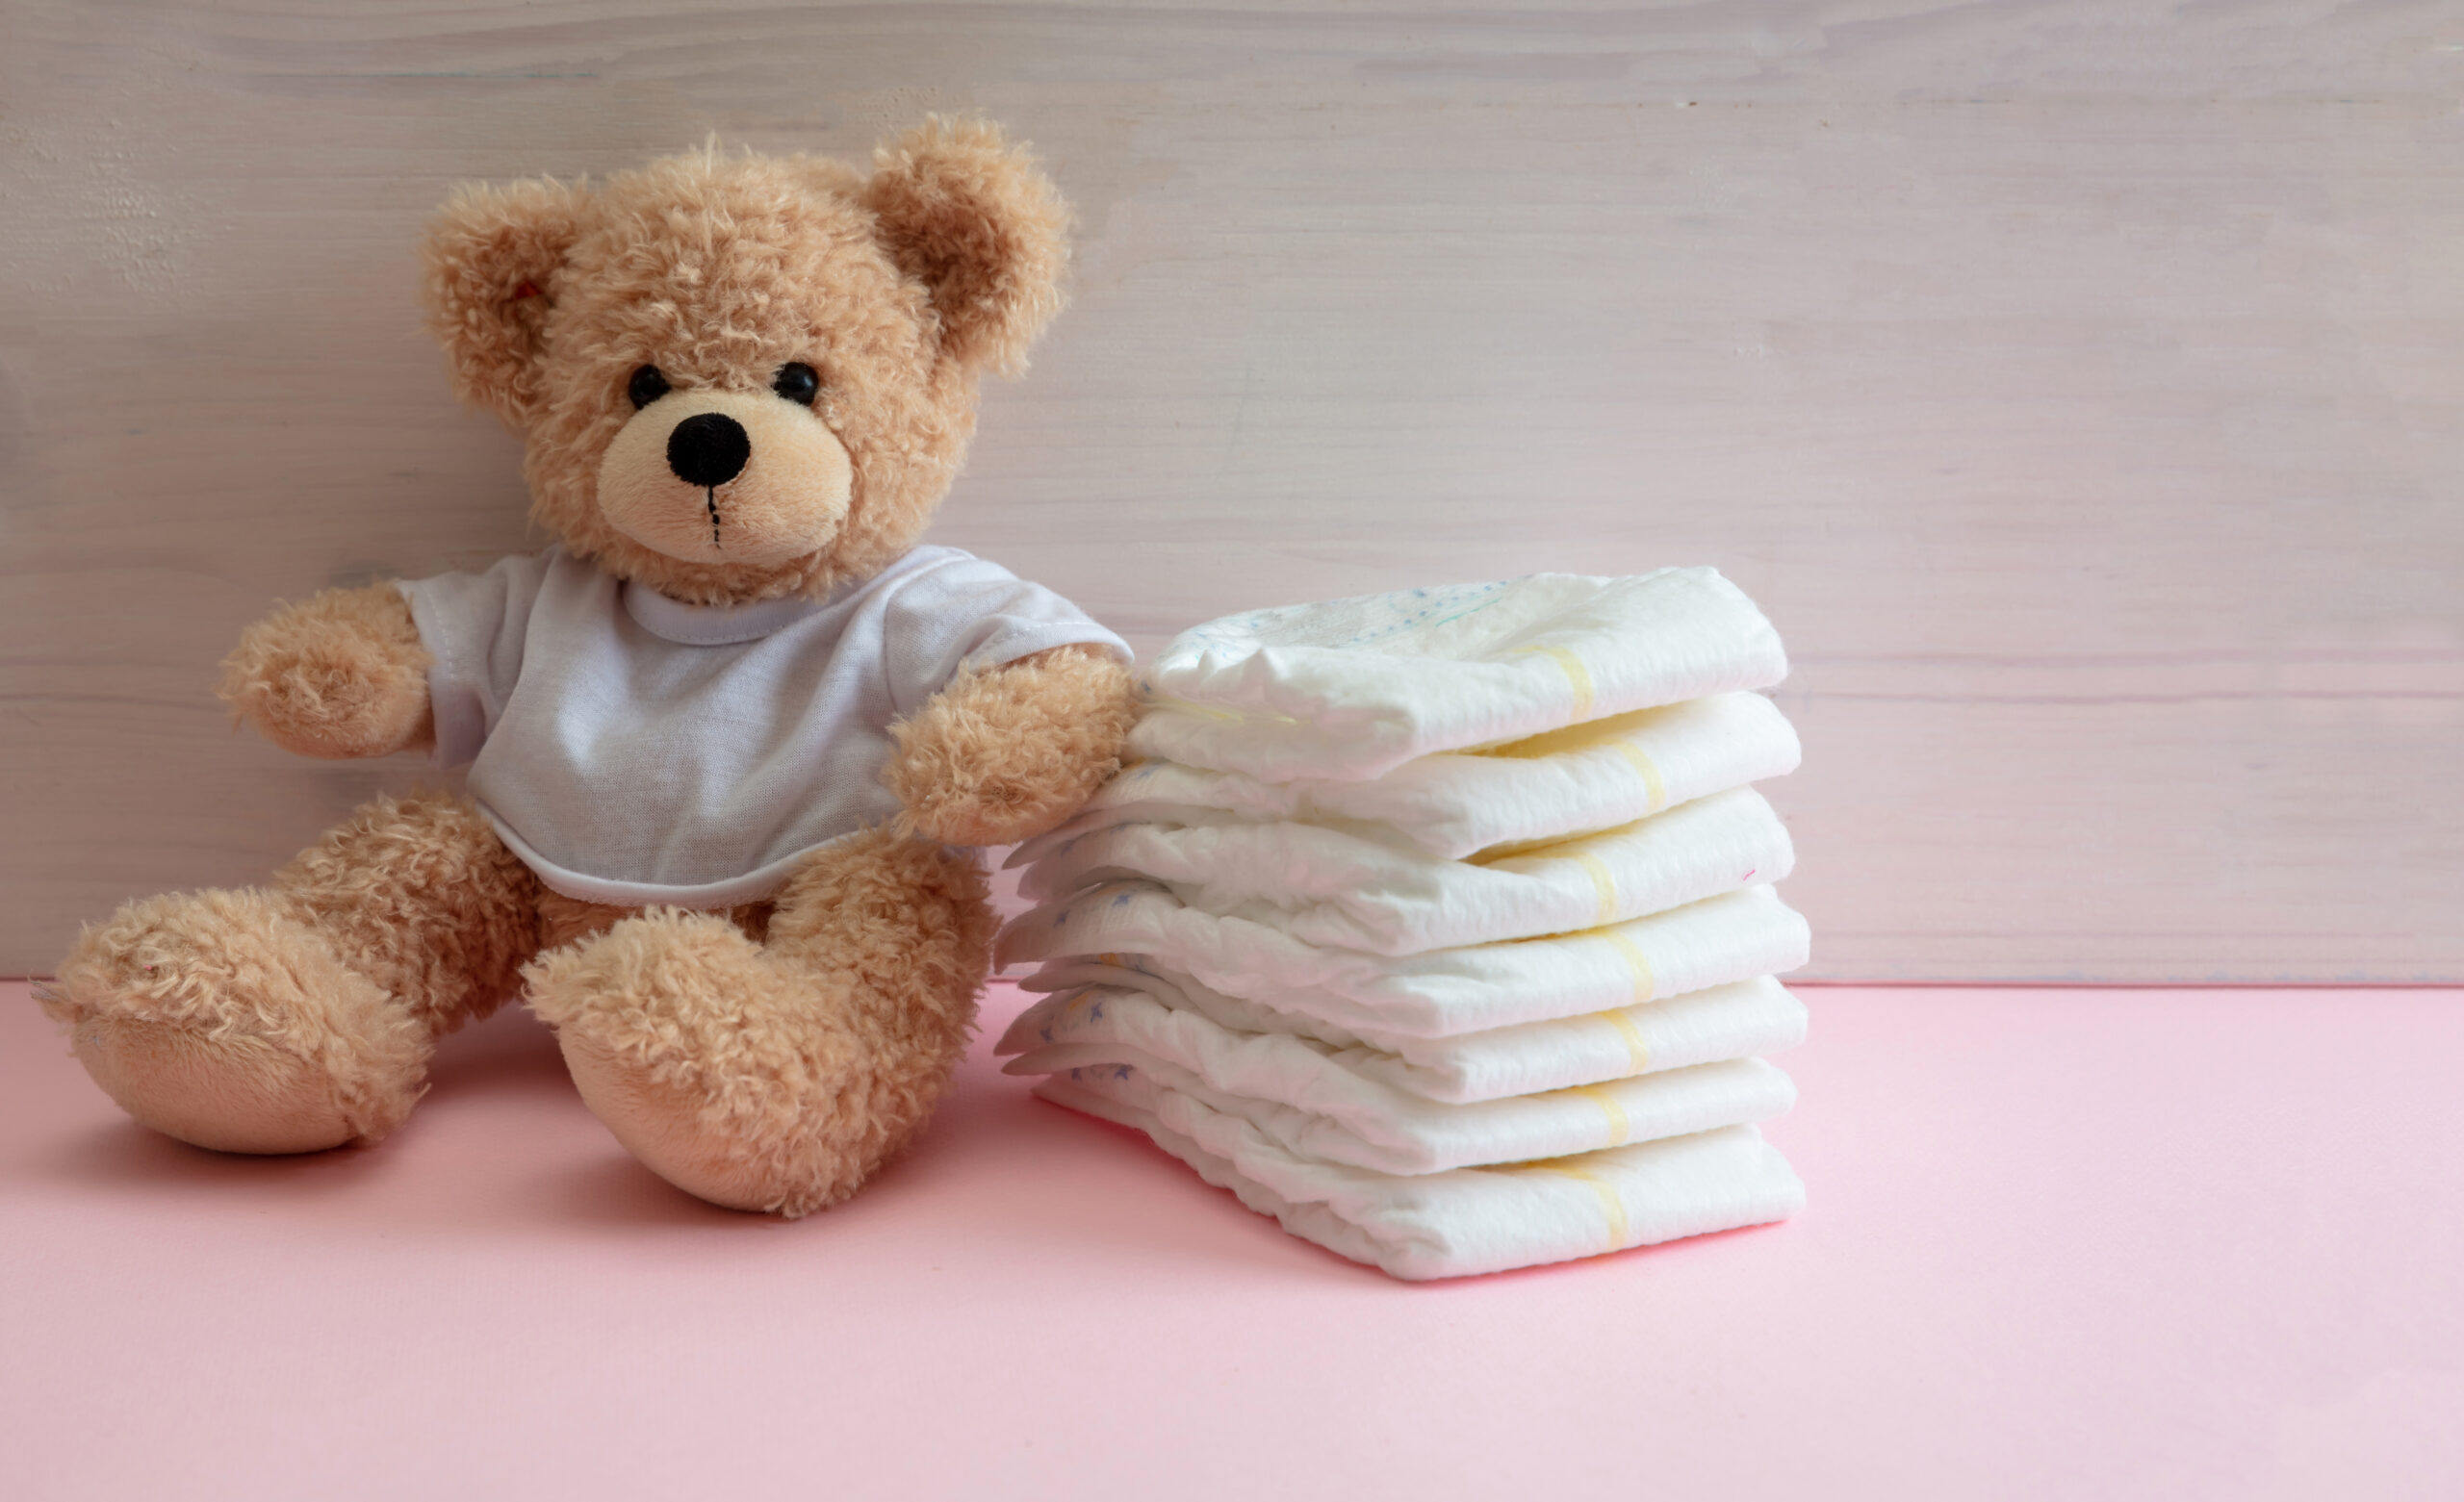 baby girl diapers teddy sitting on pink color flo 2022 12 16 12 23 06 utc scaled